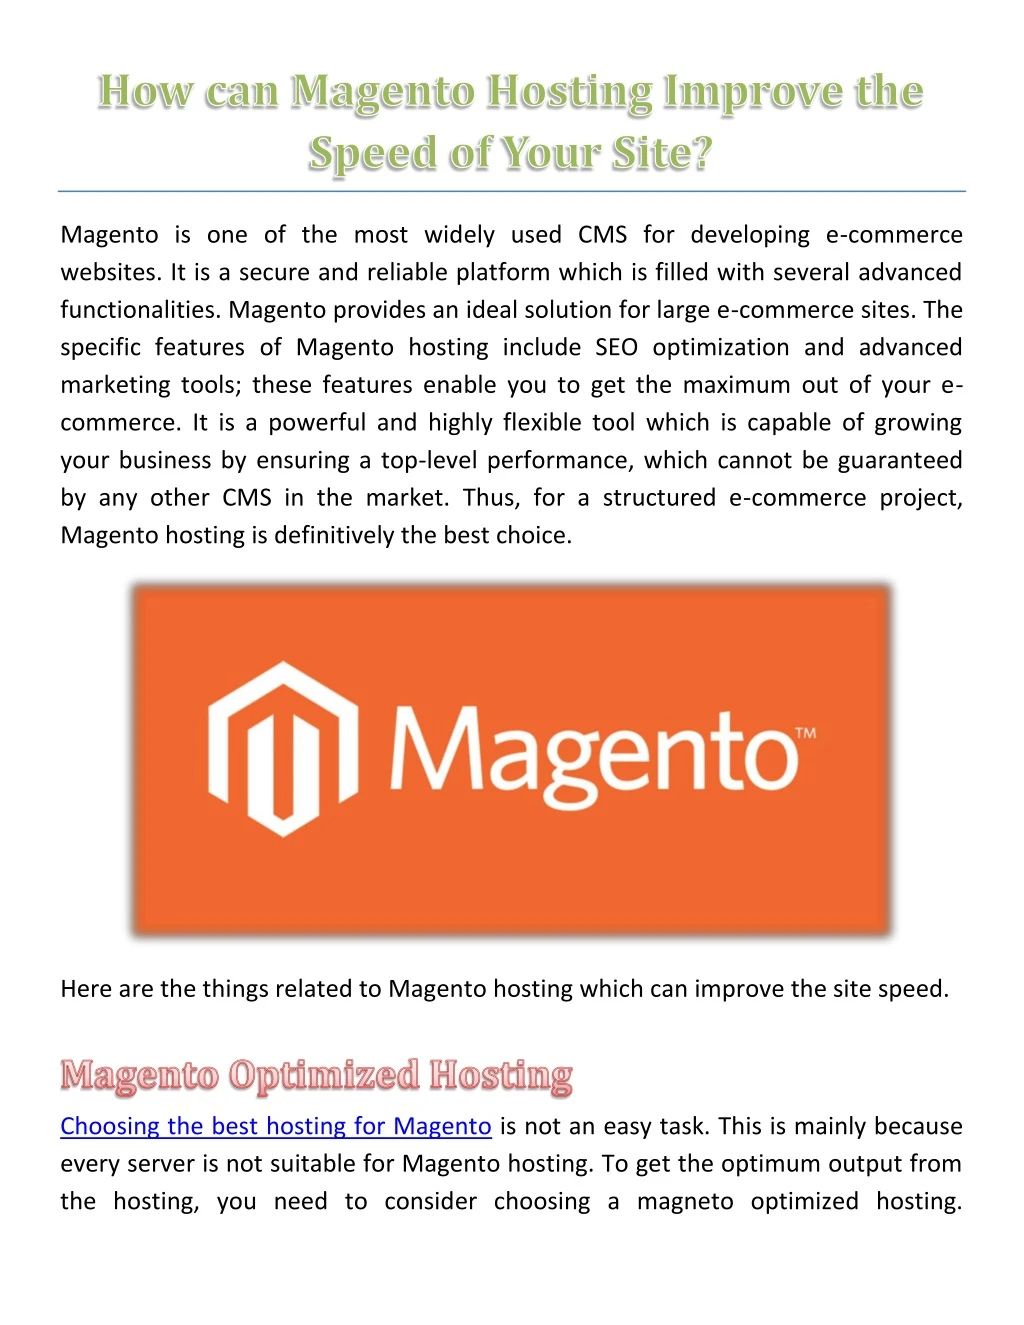 magento is one of the most widely used